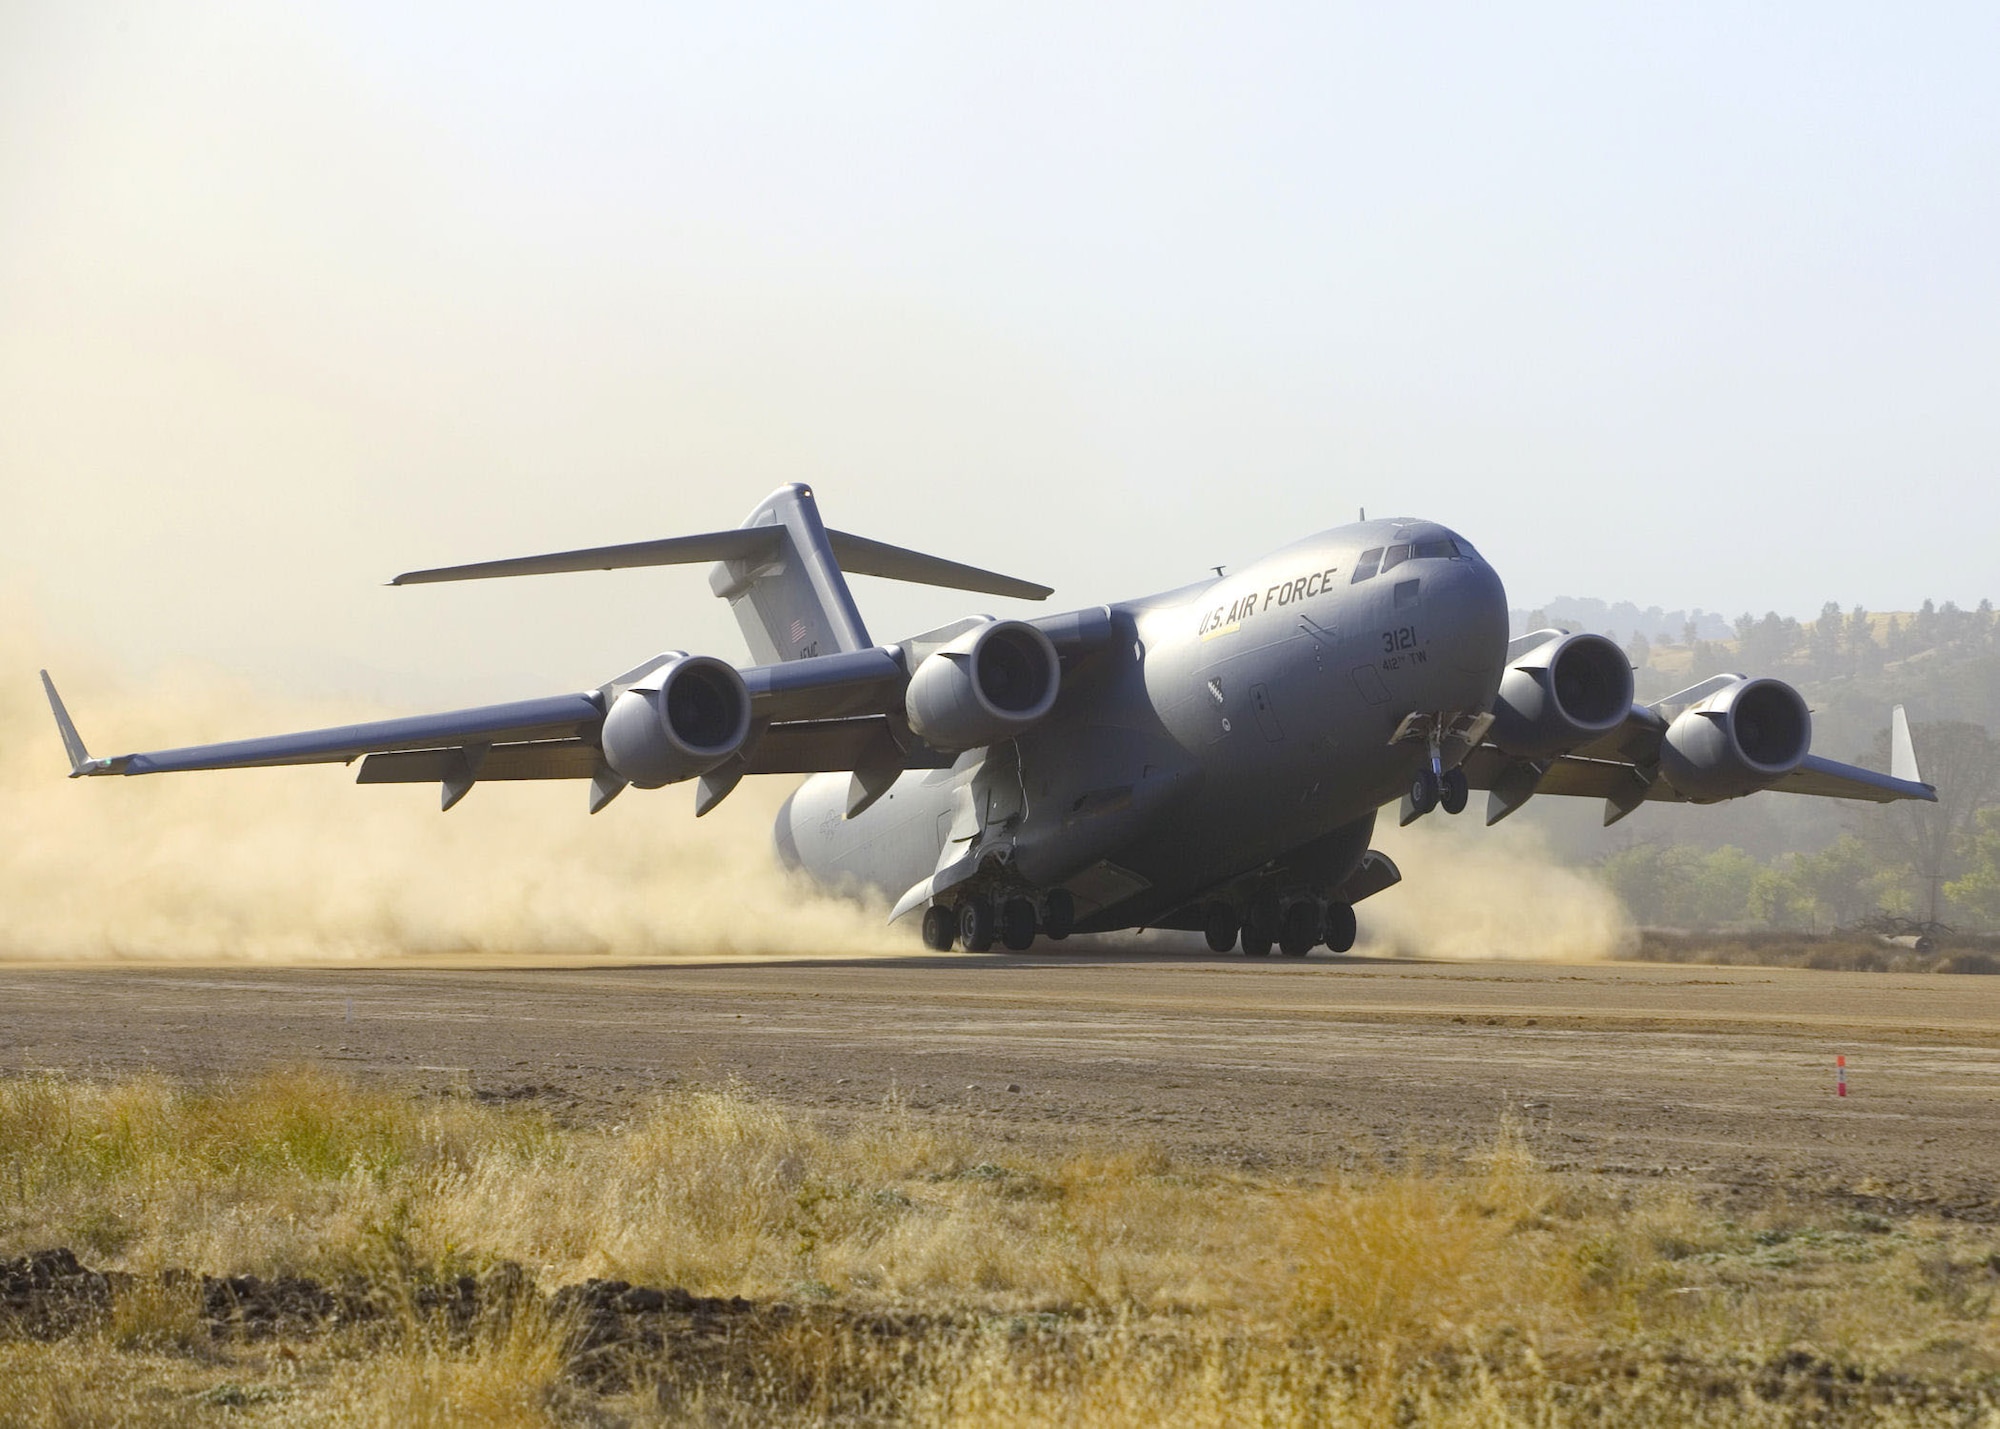 A C-17 Globemaster III takes off from Fort Hunter Liggett, Calif., Sept. 23, 2006, while performing take-off and landing testing on semi-prepared runways. The first of four test phases was conducted at Fort Hunter Liggett to validate the ability of the aircraft to bring a large force into a wet or dry dirt airfield without making runway condition corrections. (Photo by Bobbi Zapka)